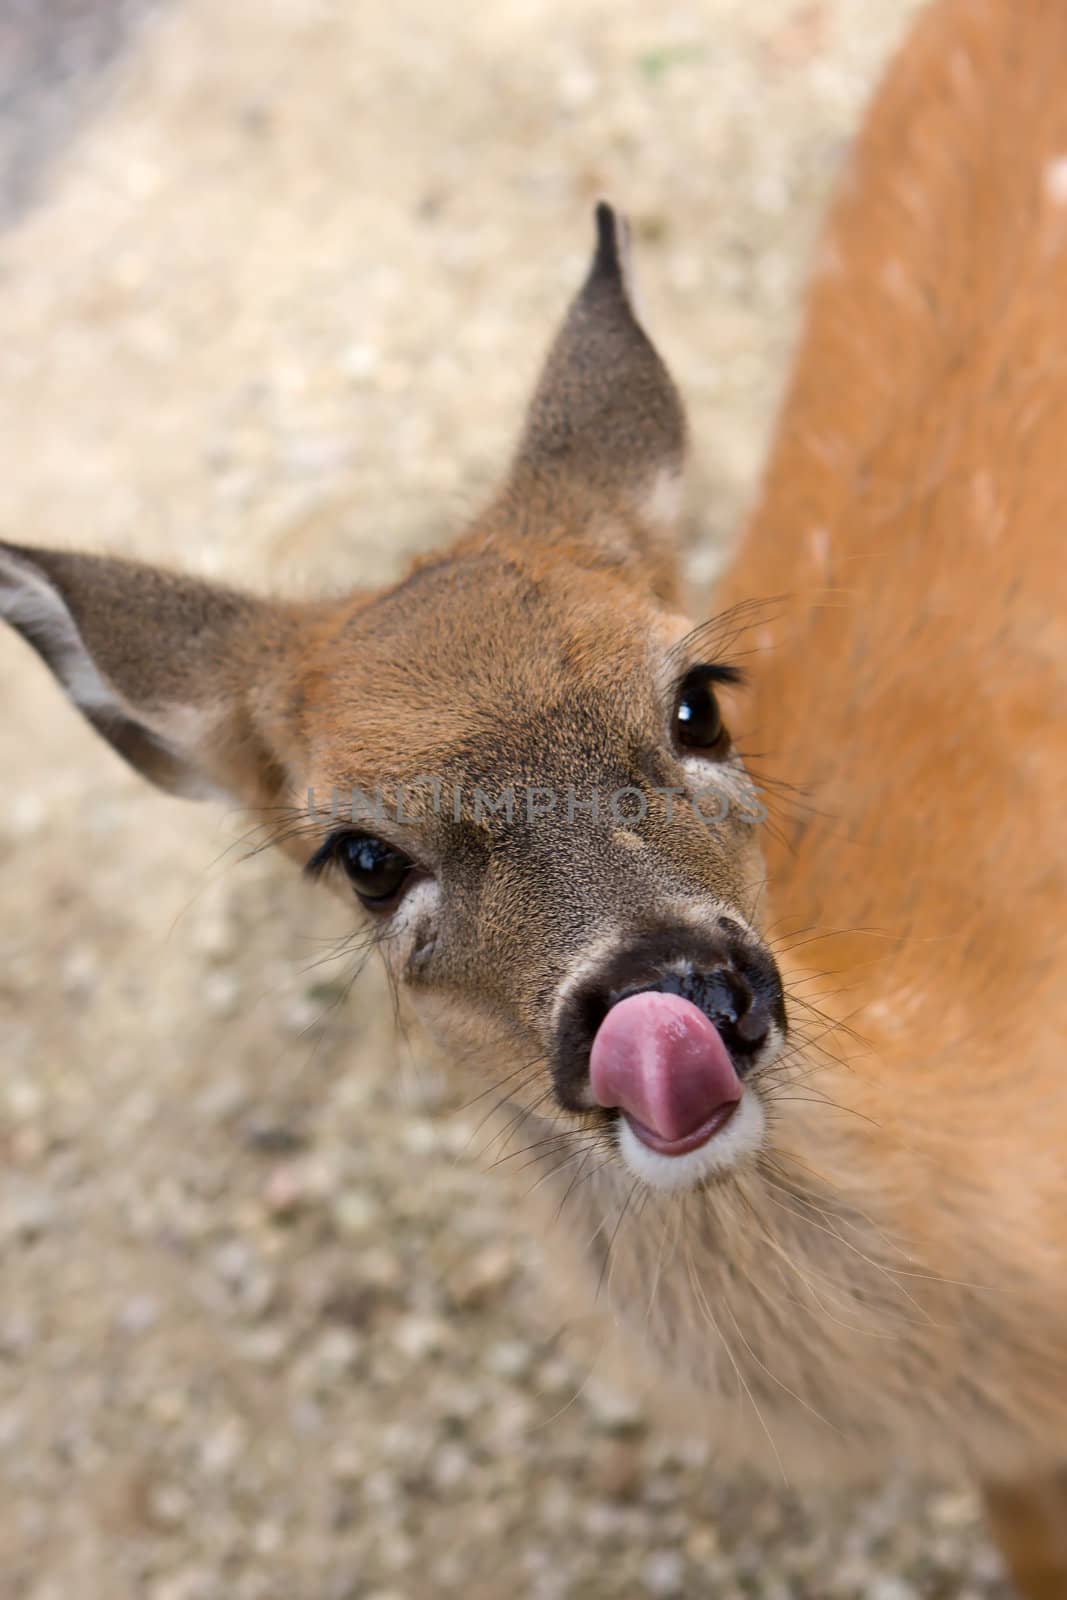 Small female deer licking it's lips and nose.